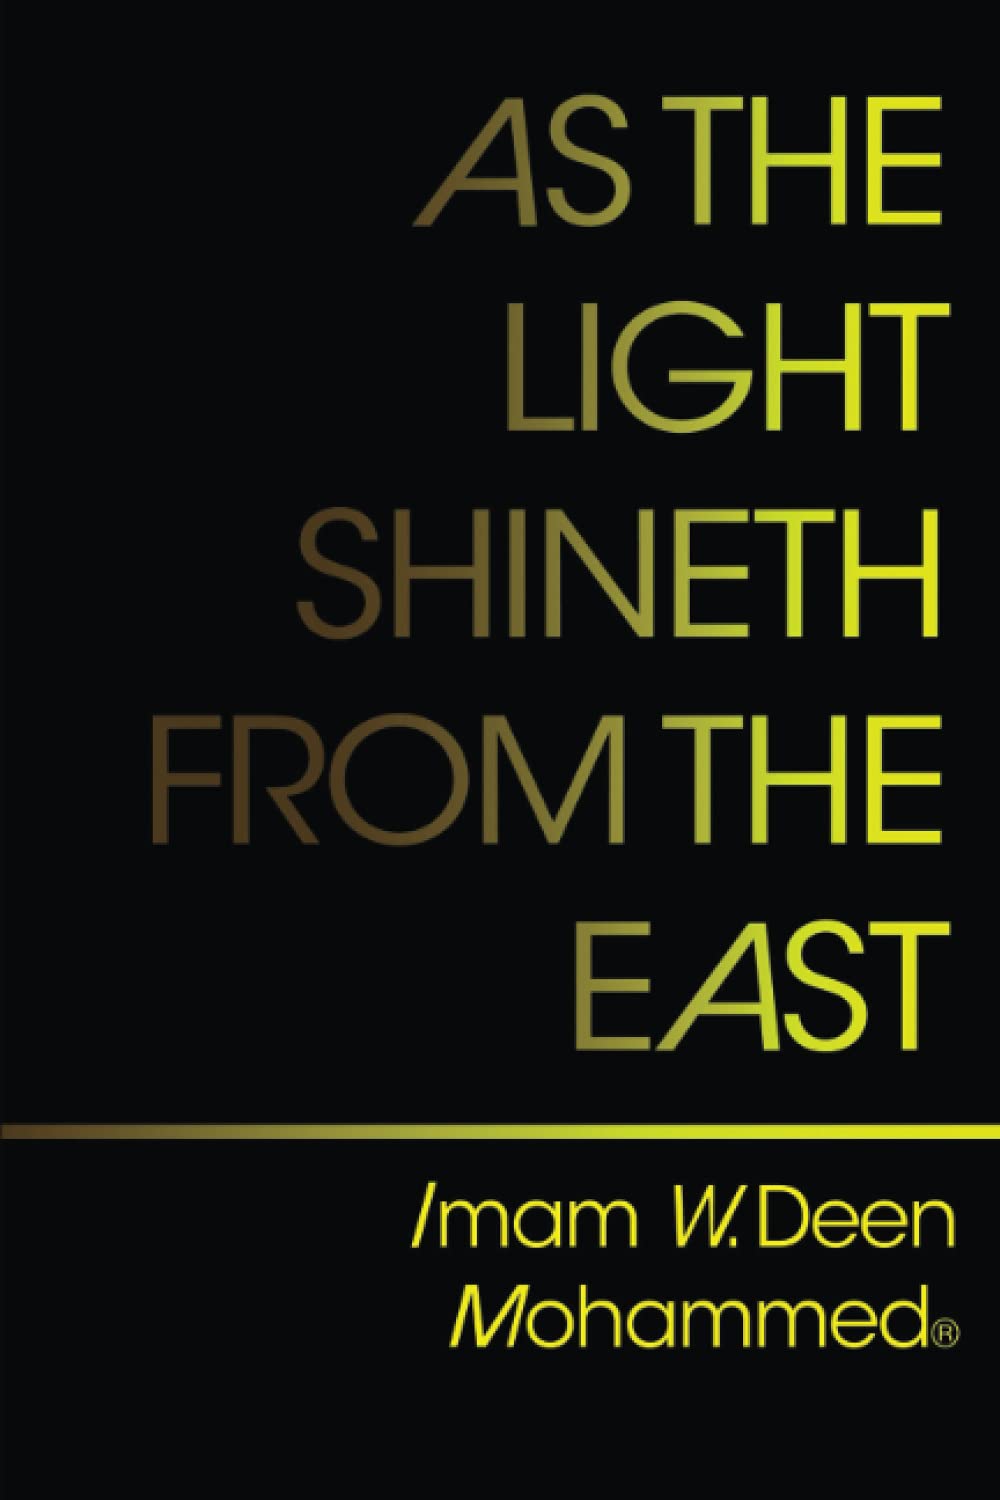 As the Light Shineth from the East